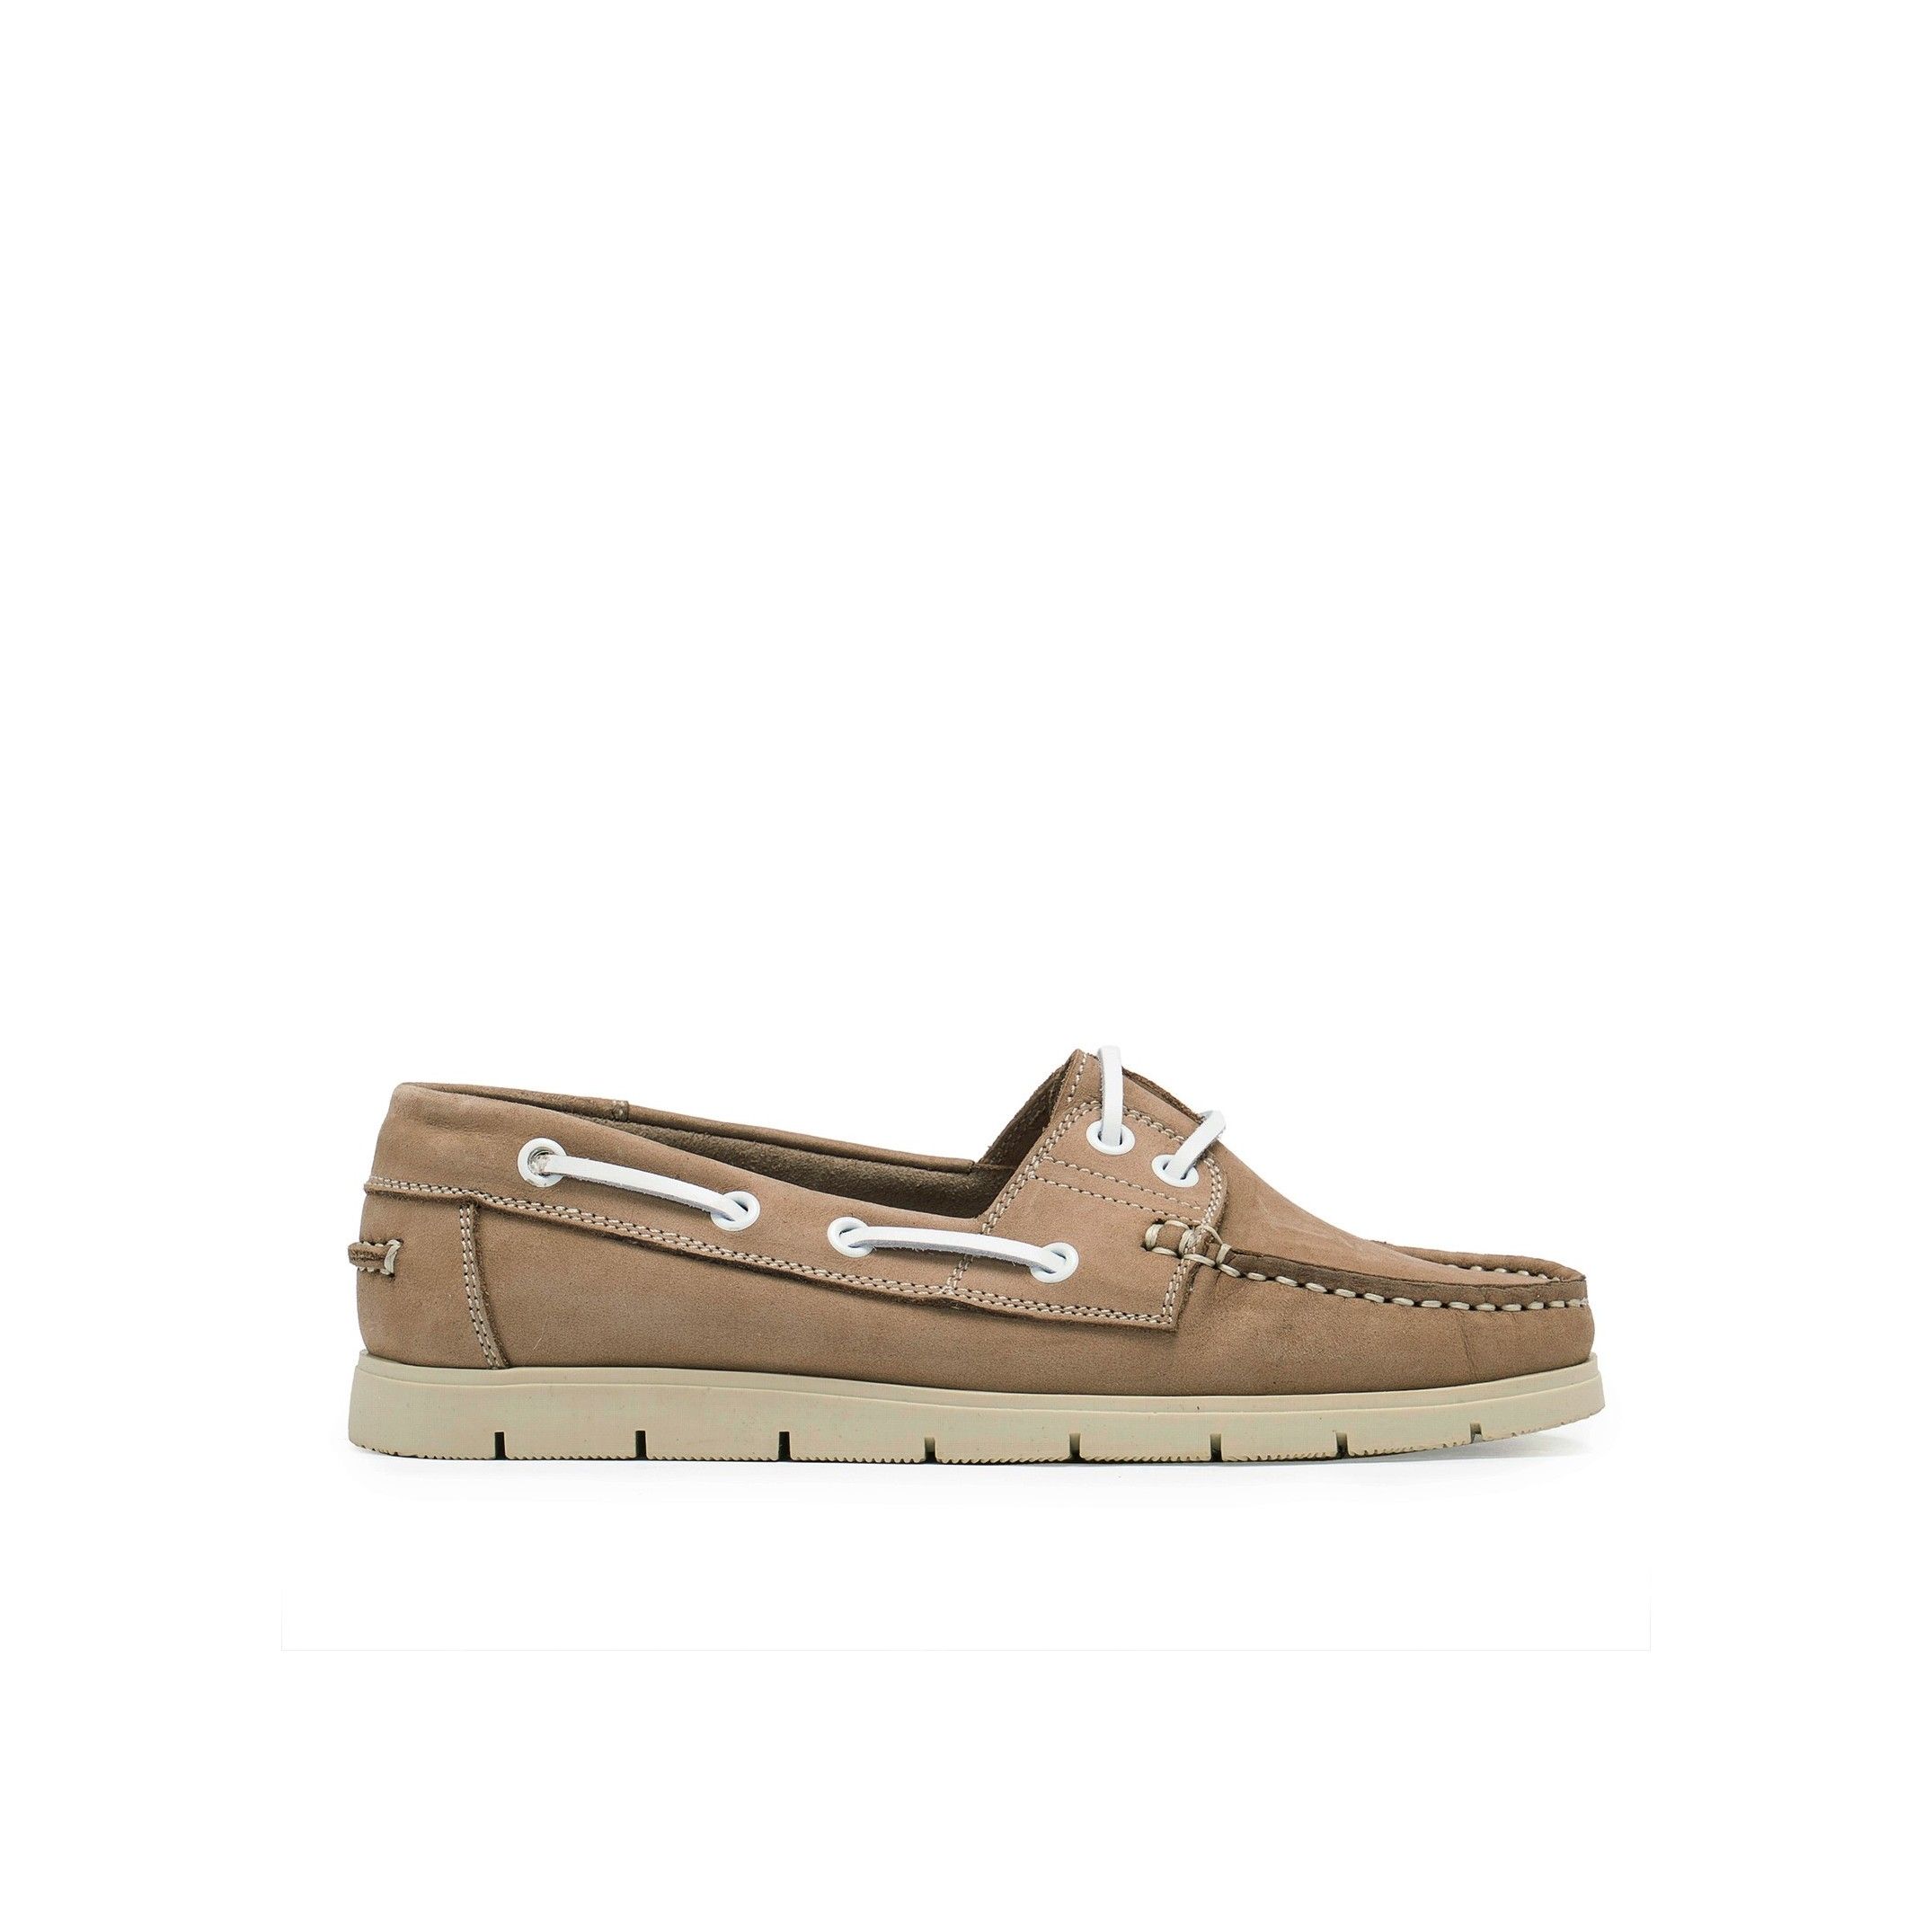 Leather boat shoes for women, by Son Castellanisimos. Upper made of cowhide leather. Leather laces closure. Inner lining and insole made of cowhide leather. Sole material: synthetic and non slip. Heel height: 1,5 cm. Designed and made in Spain.